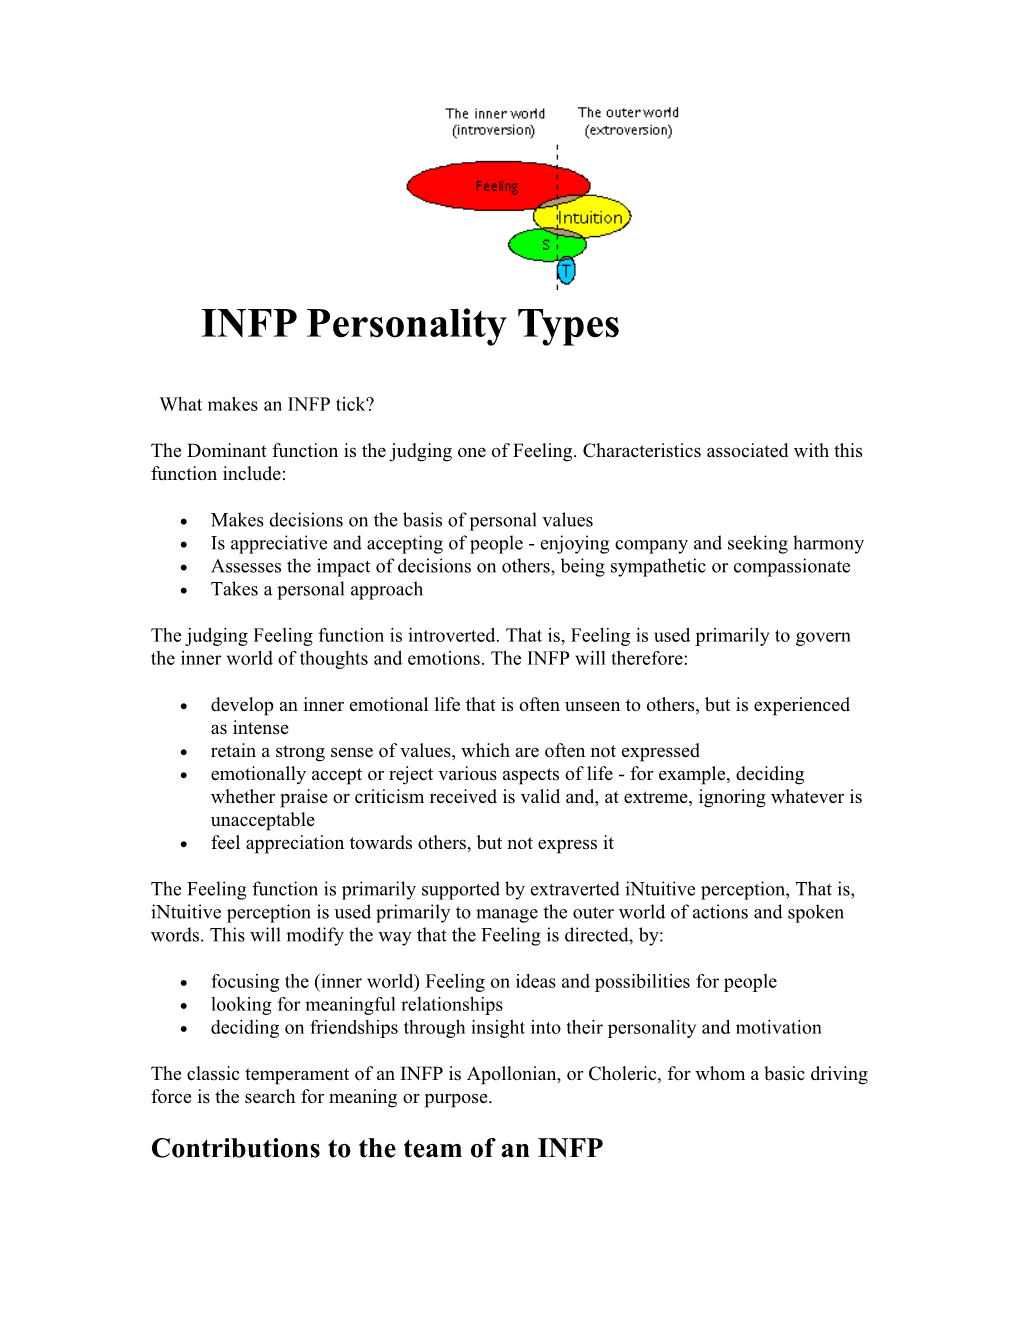 INFP Personality Types